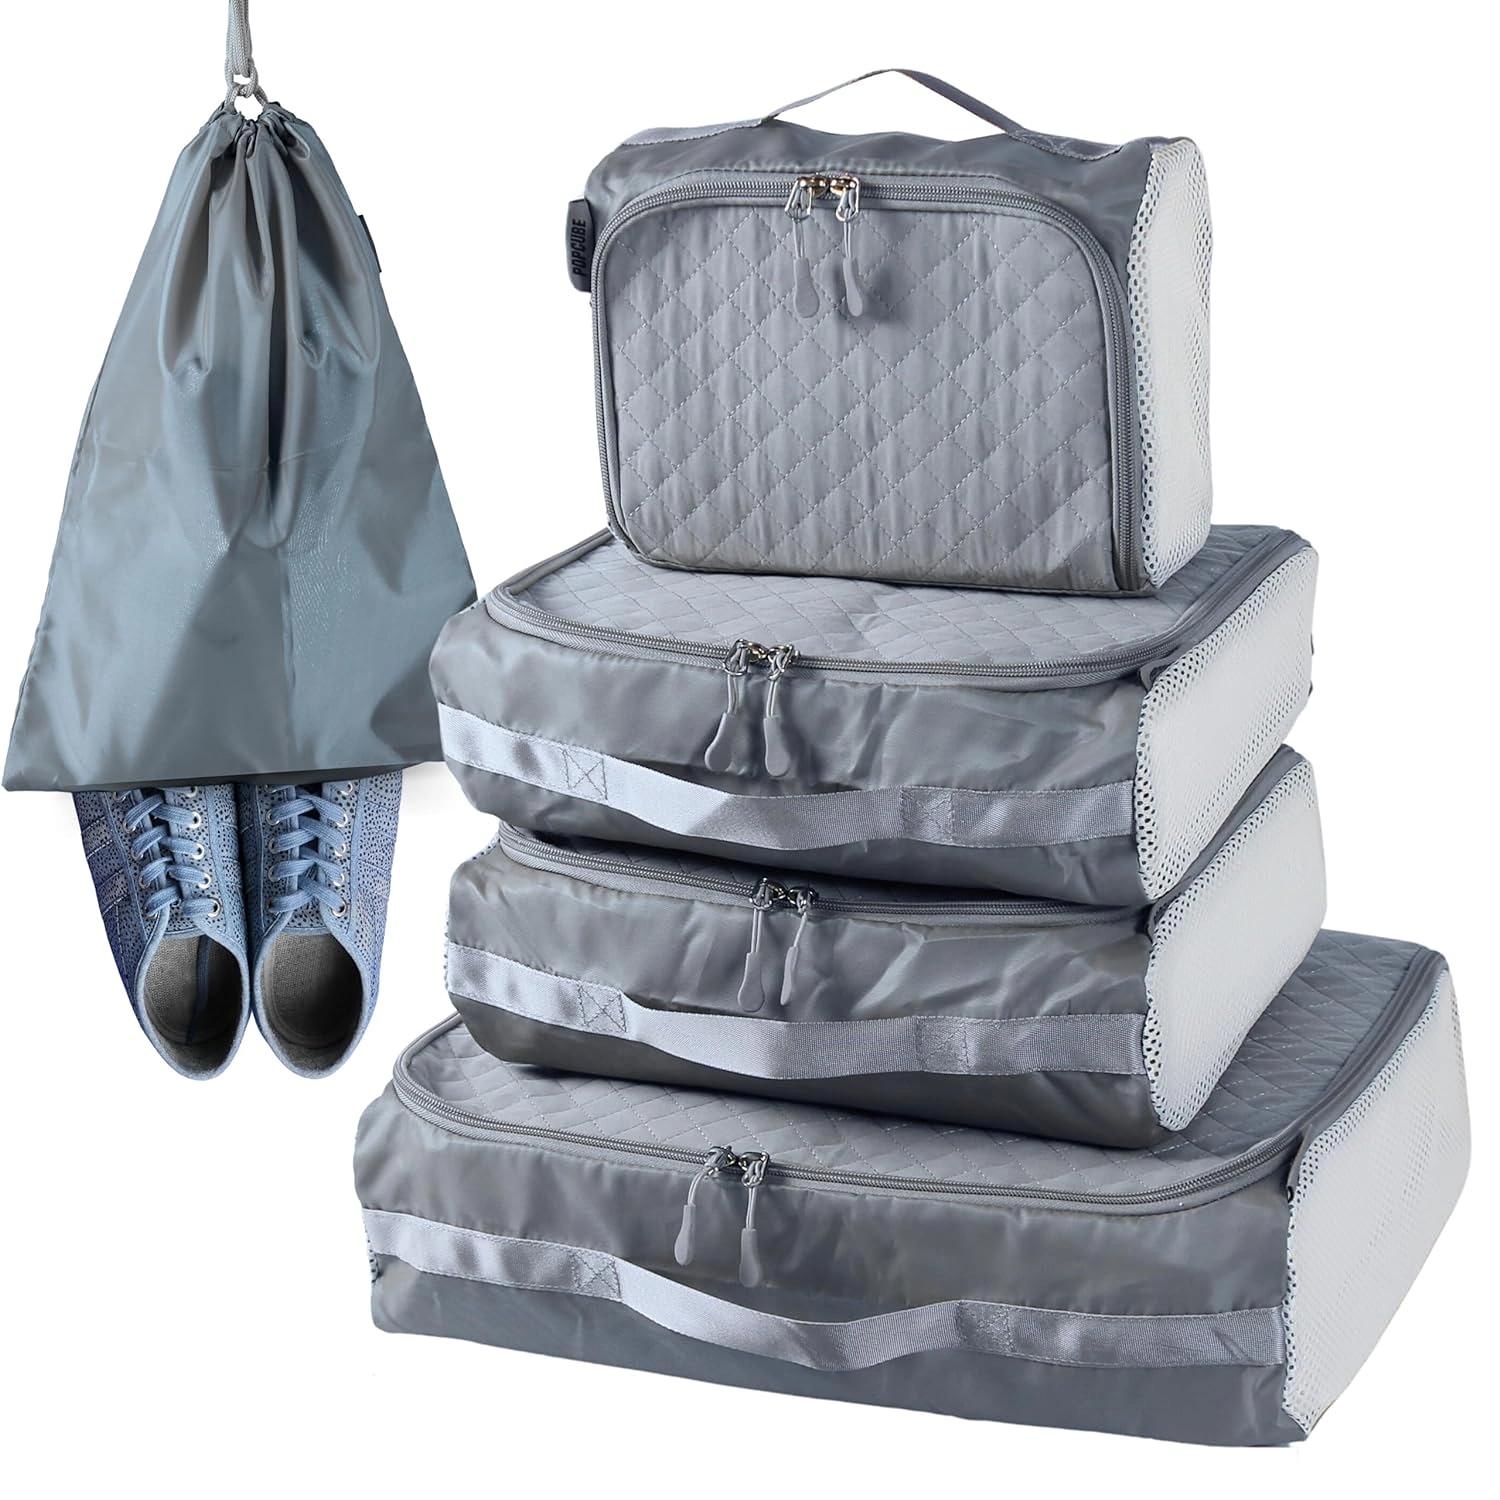 Polyester Premium Packing Cubes For Travel – Quilted Packing Cubes For Travel–Travel Bag Organisers For Luggage For Men&Women – Set Of 5 Packing Bags With A Shoe Bag For Clothes,Shoes. (Grey)